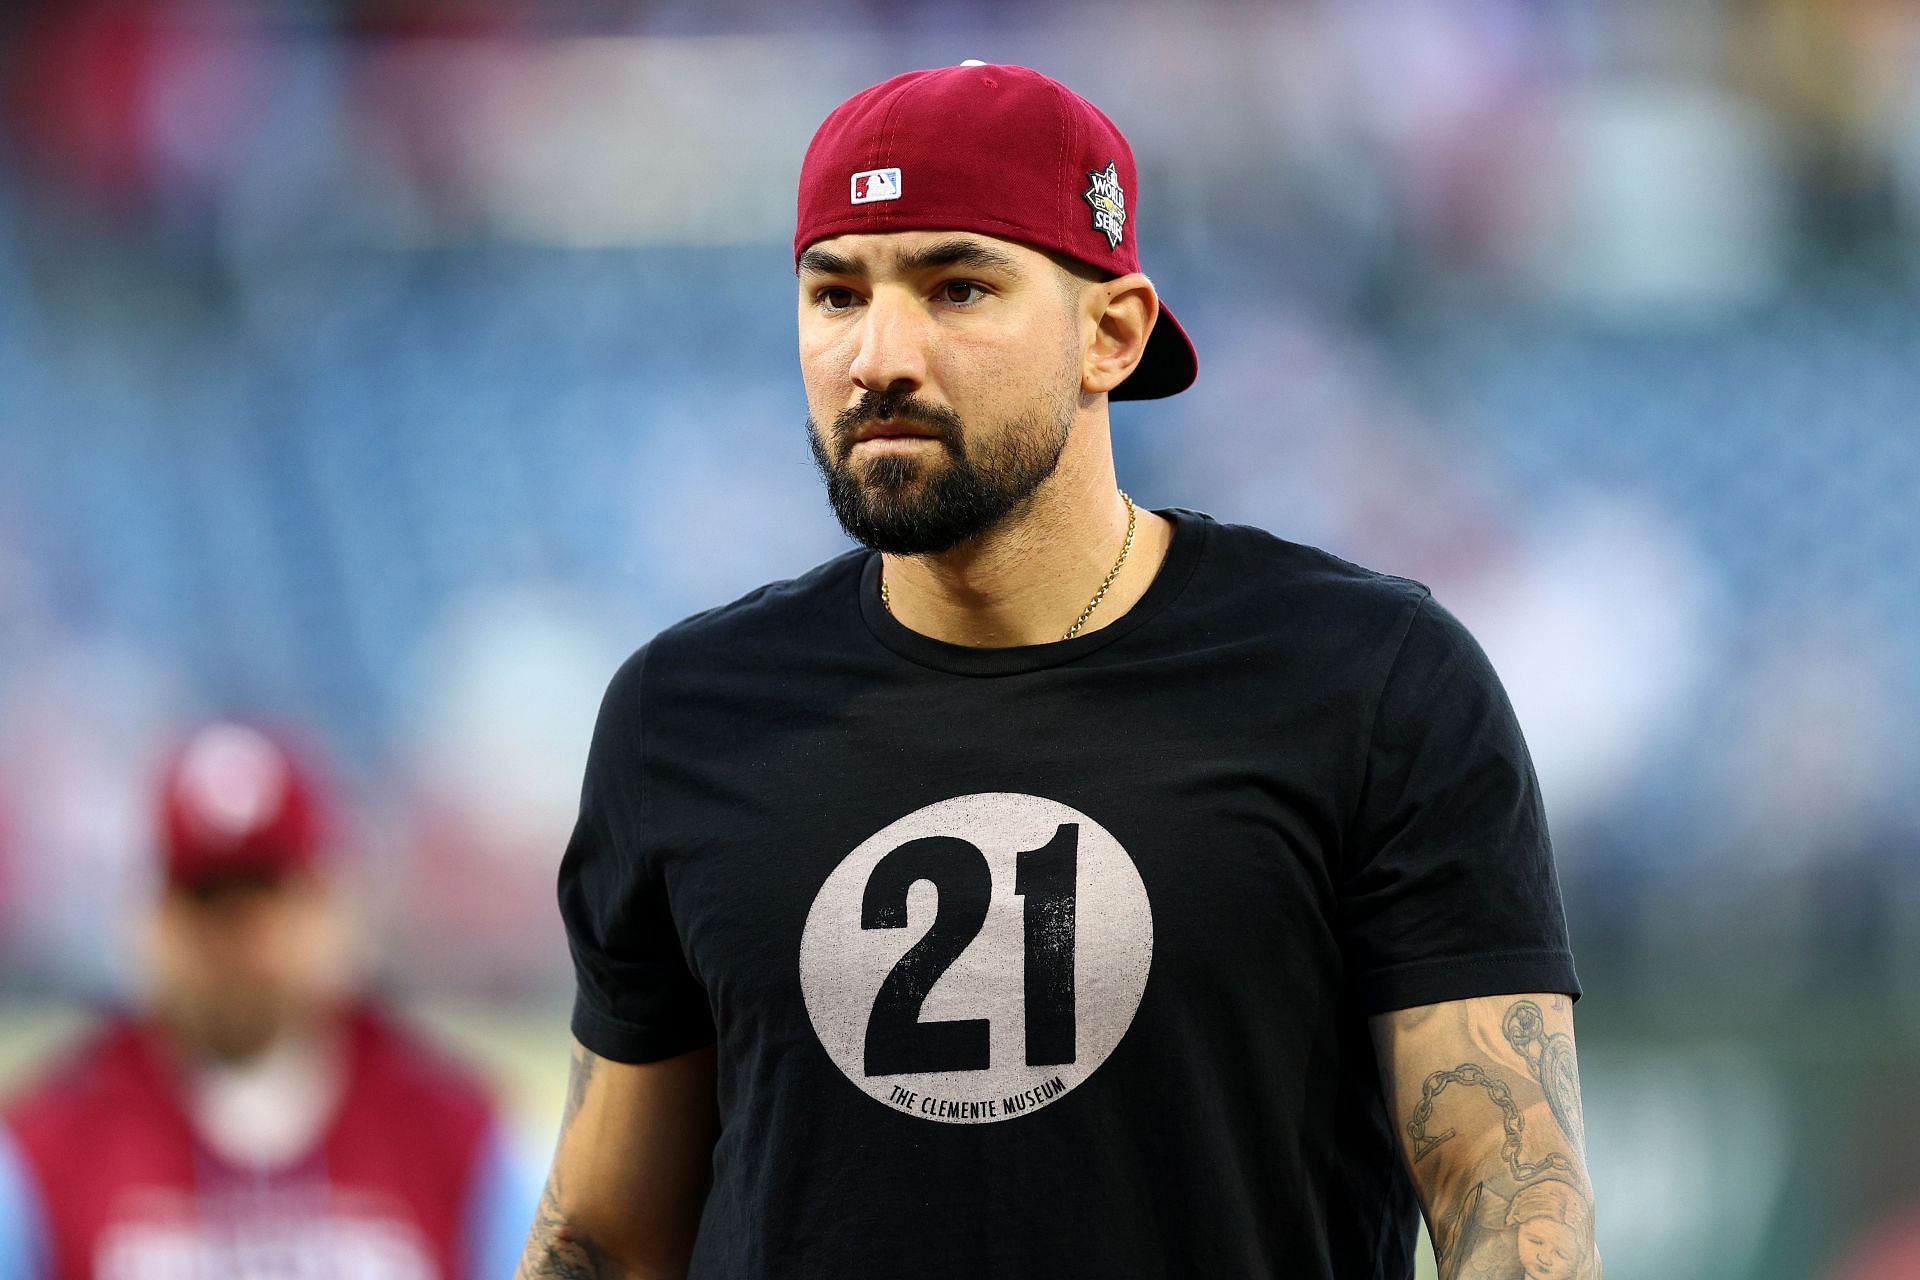 Nick Castellanos is not measuring up for the Philadelphia Phillies in early  season play and fans know it: He has failed miserably so far!